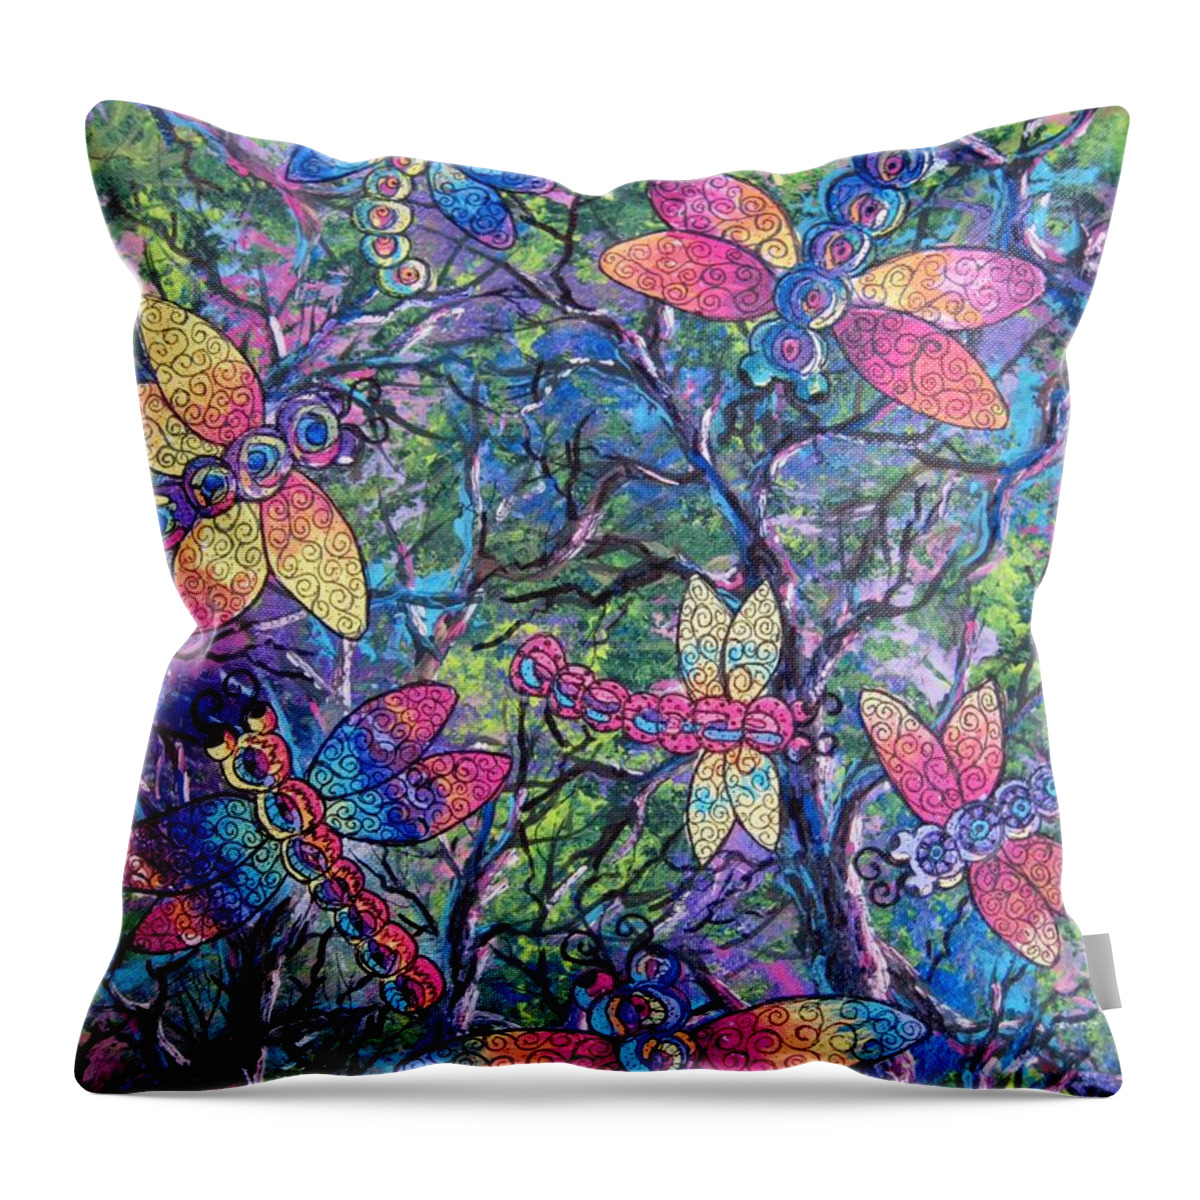 Dragon Flies Throw Pillow featuring the painting Rainbow dragons by Megan Walsh